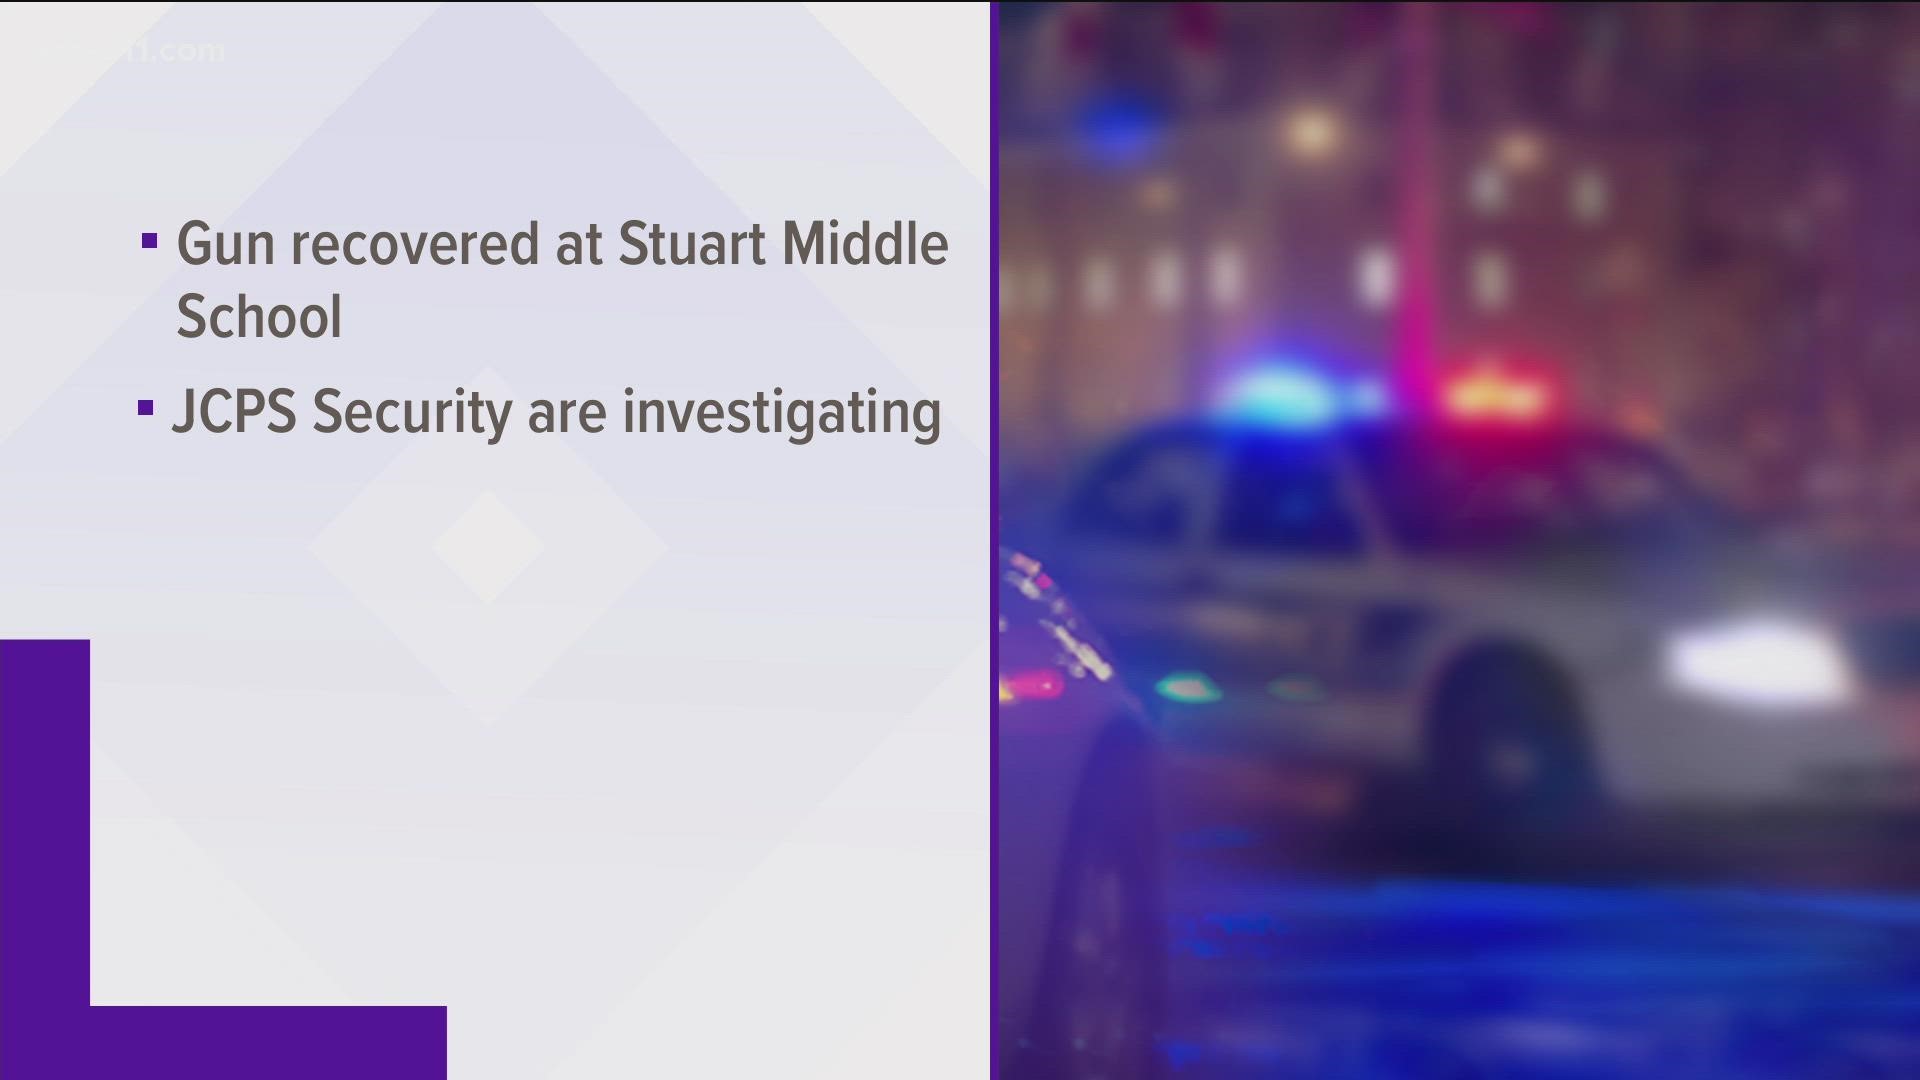 Thursday morning, LMPD confirms a loaded gun was found, confiscated at Stuart Middle School. JCPS security is investigating.